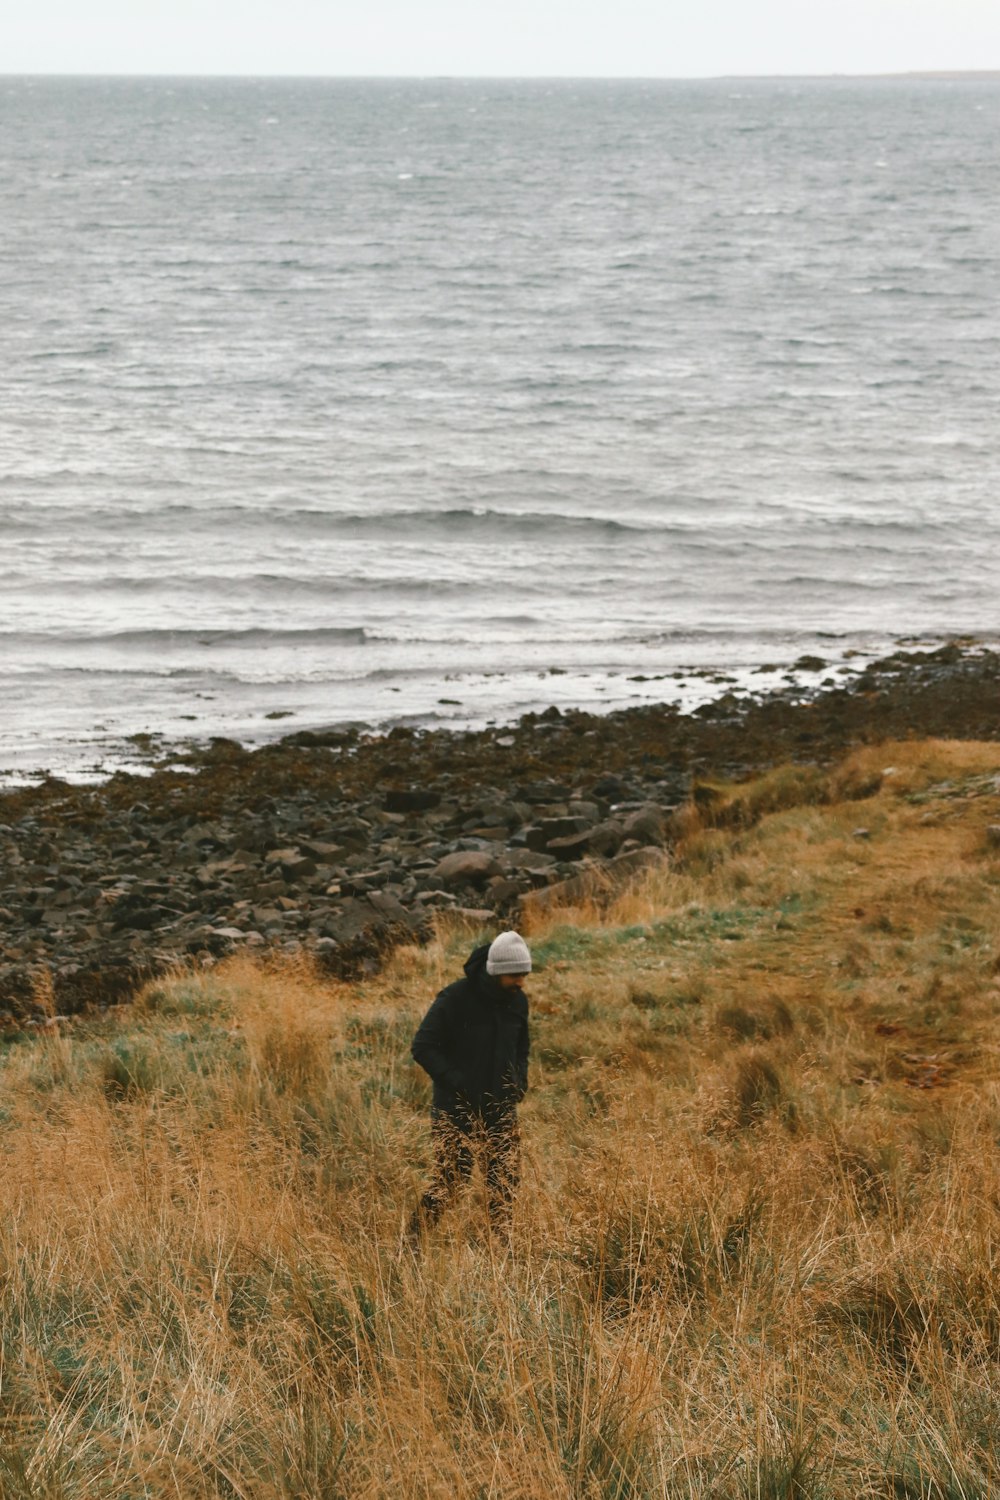 a person standing in a field next to a body of water